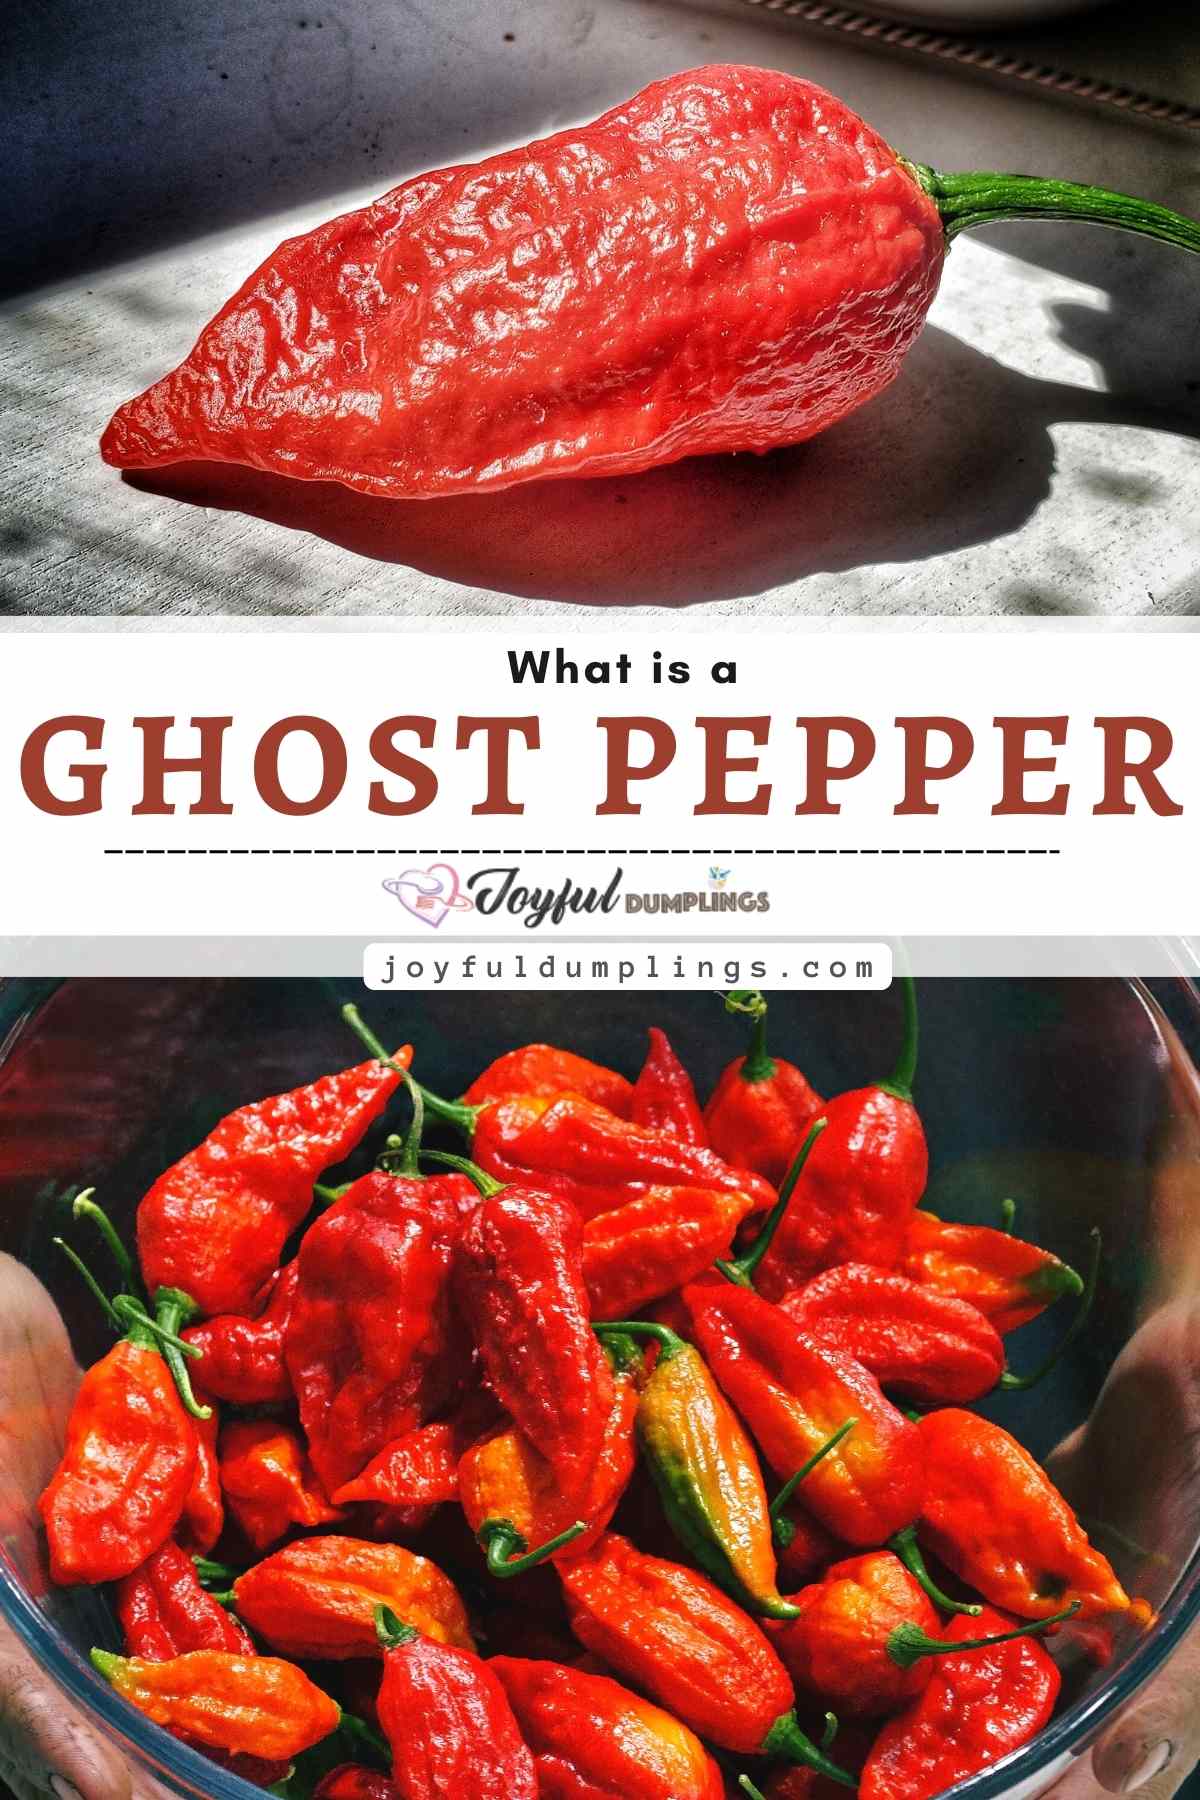 scoville units of a ghost pepper